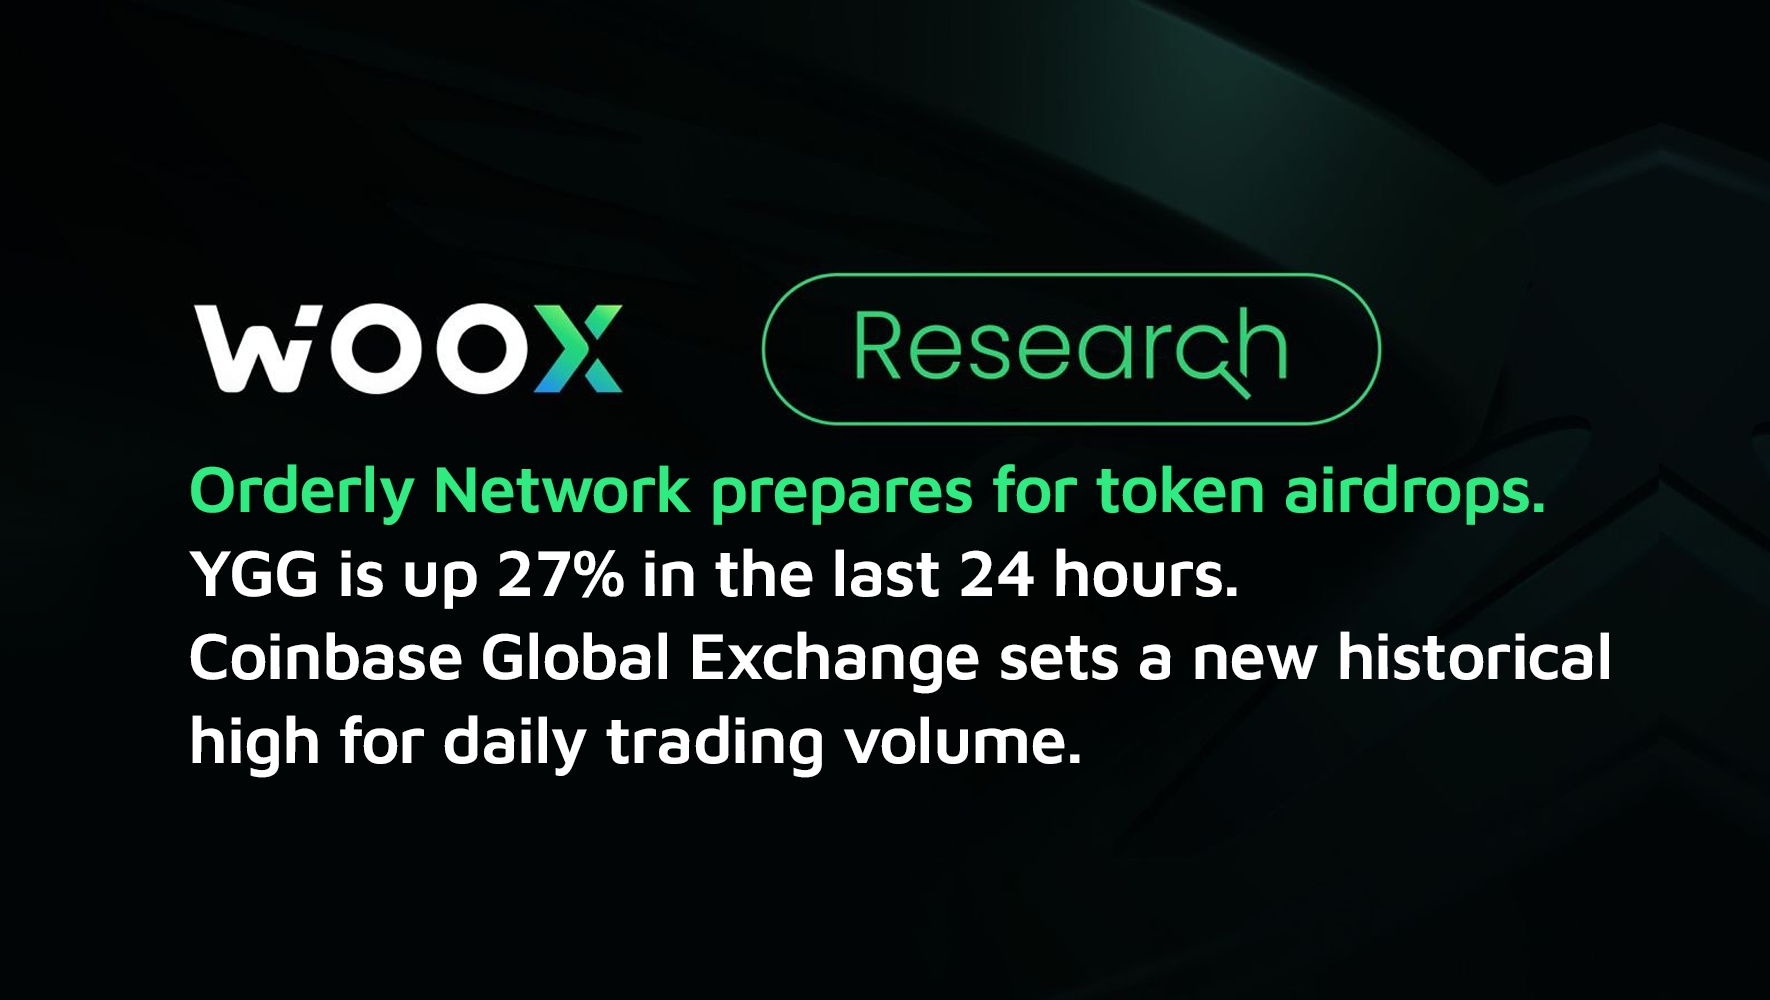 Orderly Network prepares for token airdrops